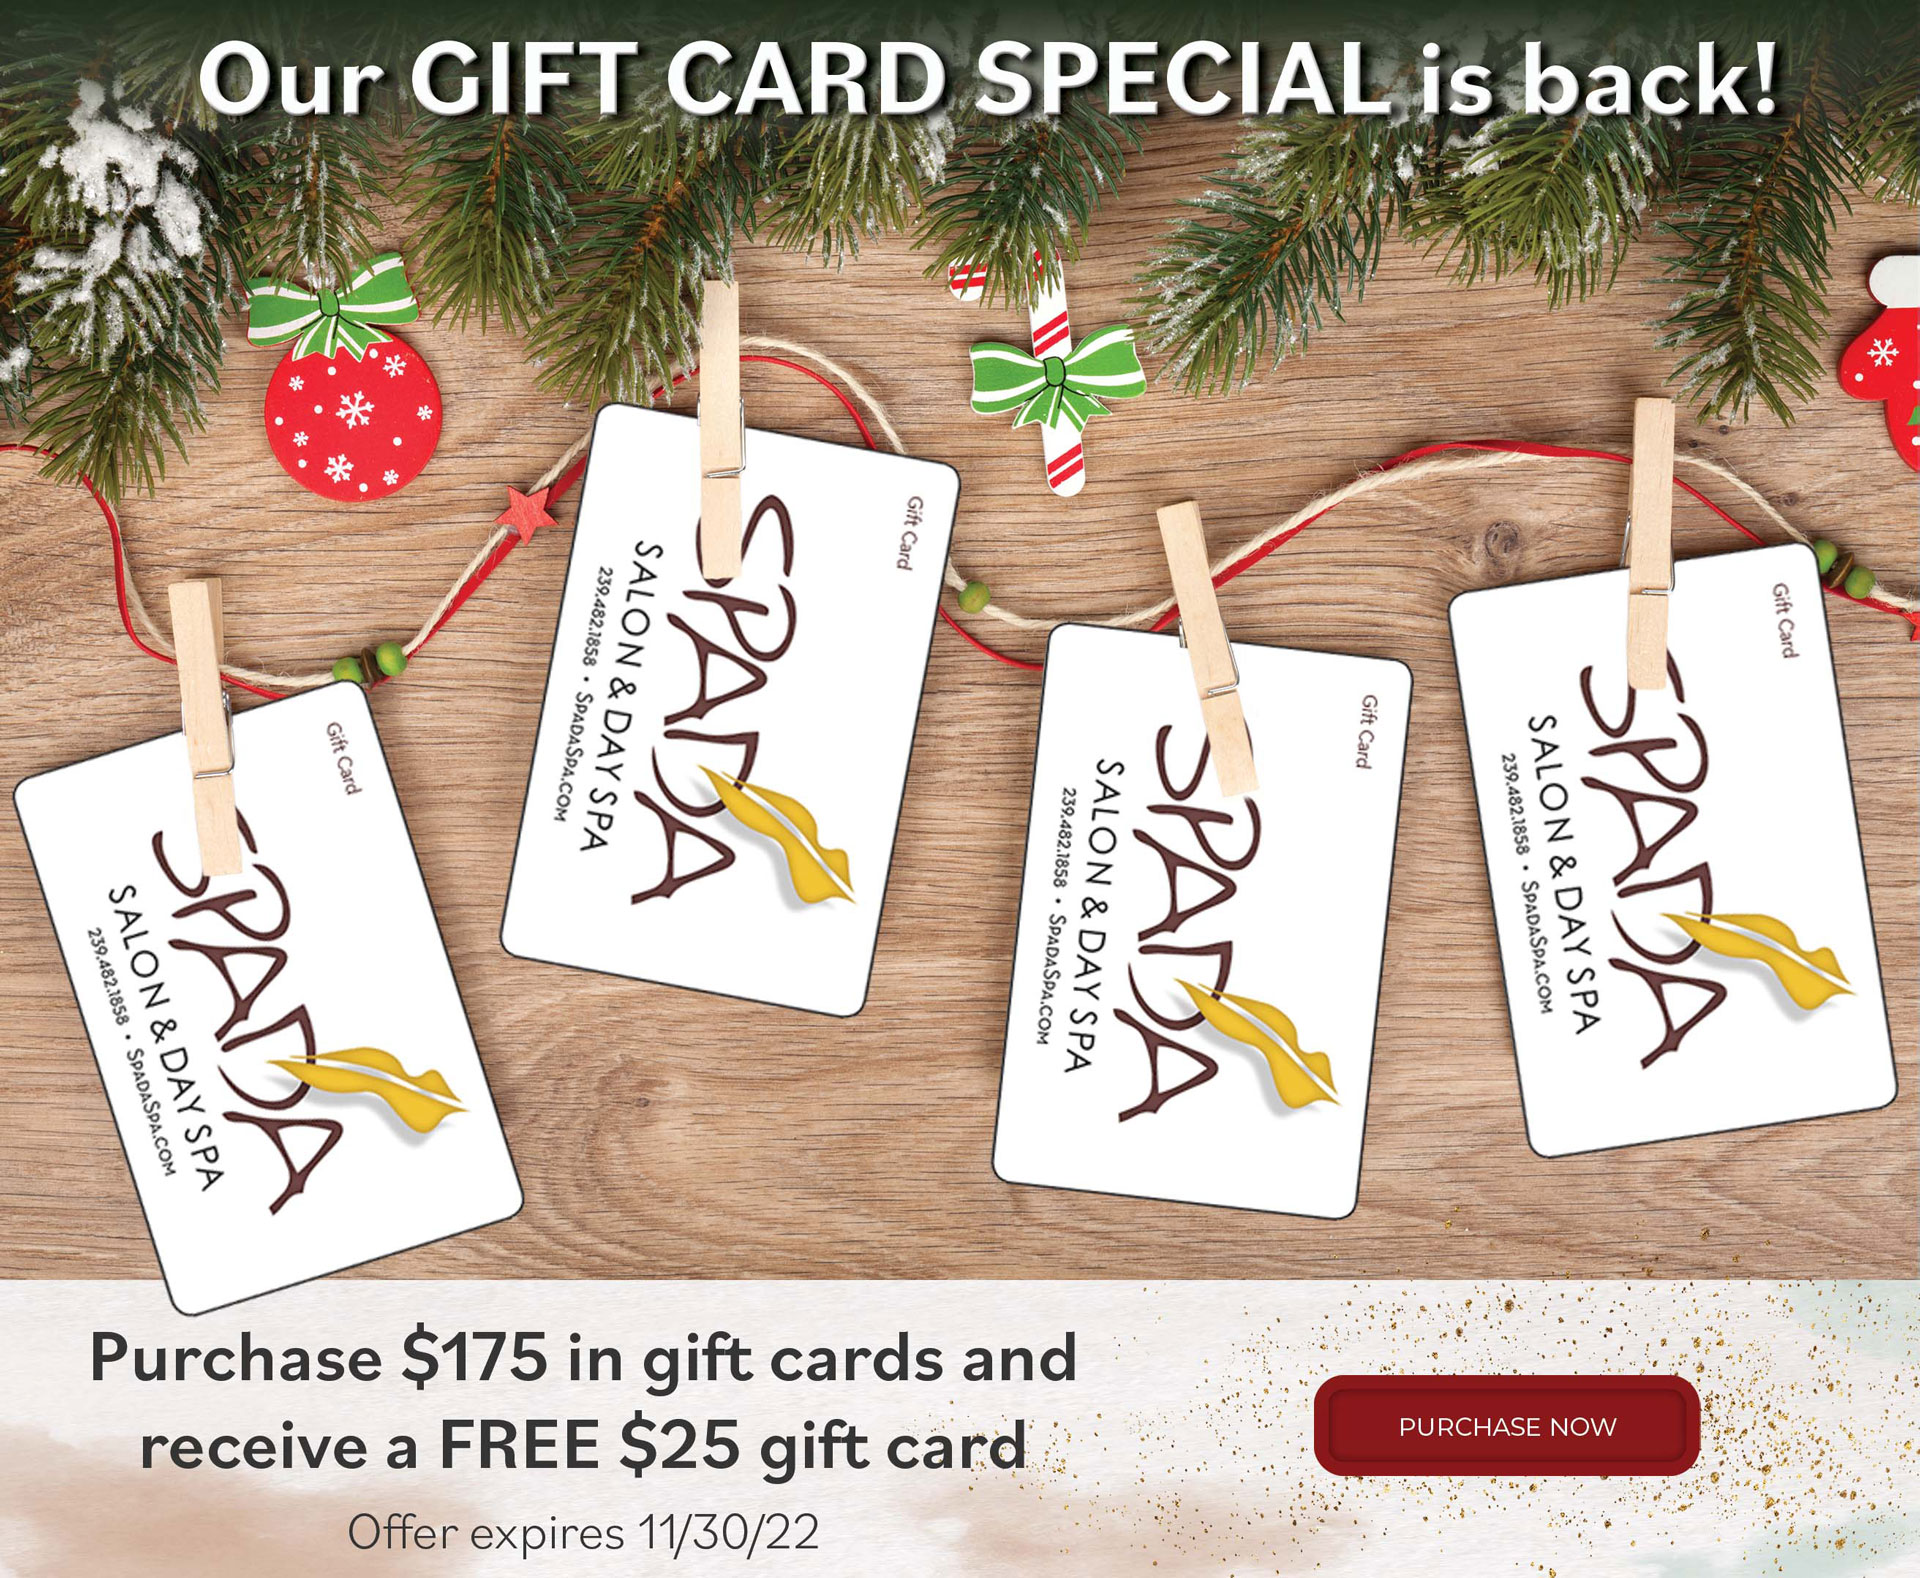 Our gift card special is back! Purchase $175 in gift cards and receive a free $25 gift card. Offer expires 11/30/22. Purchase now.